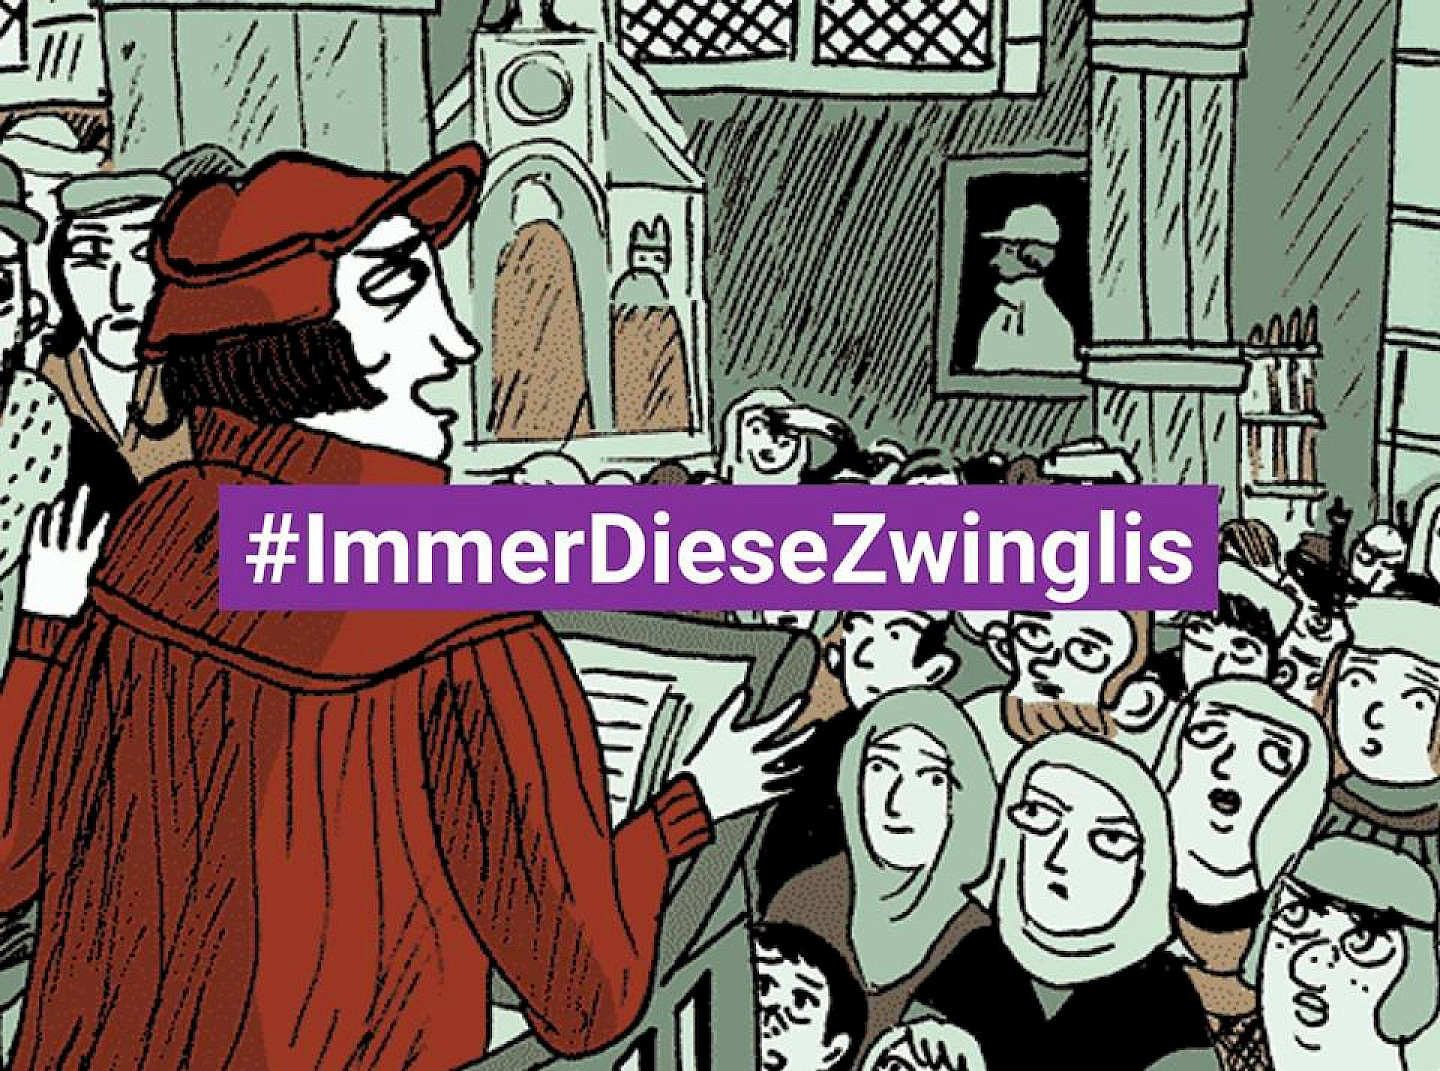 Preview: Immer diese Zwinglis!